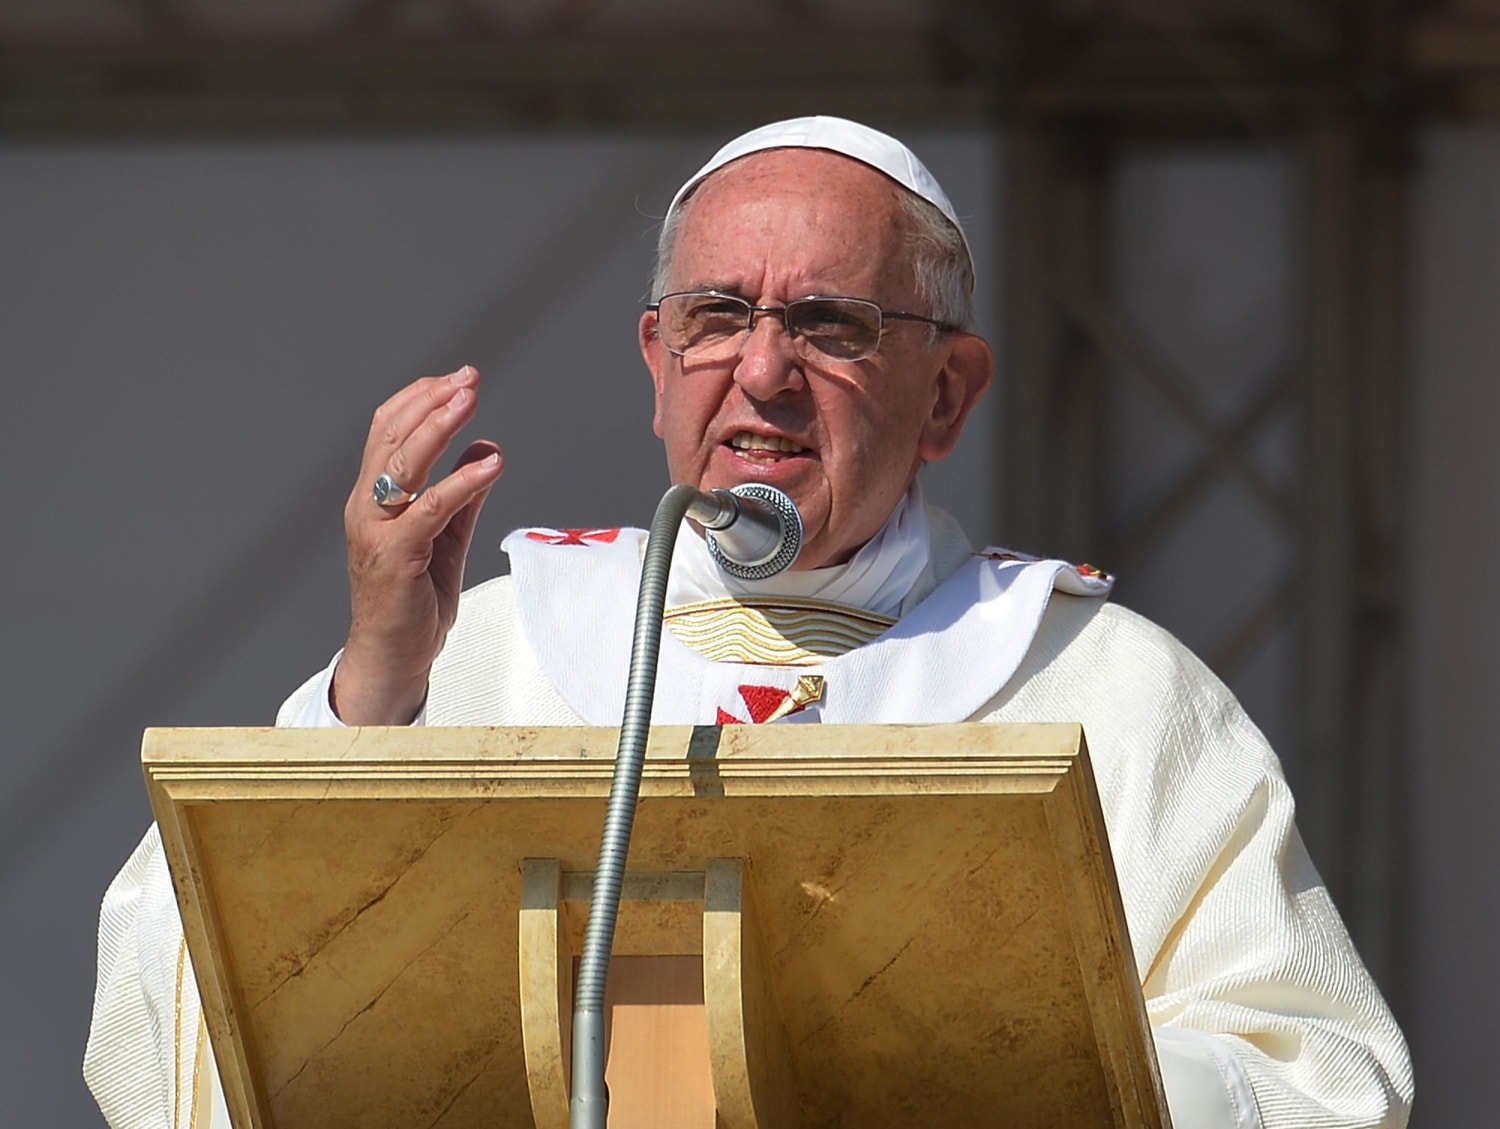 Are 'Excommunicated', Pope Francis Says